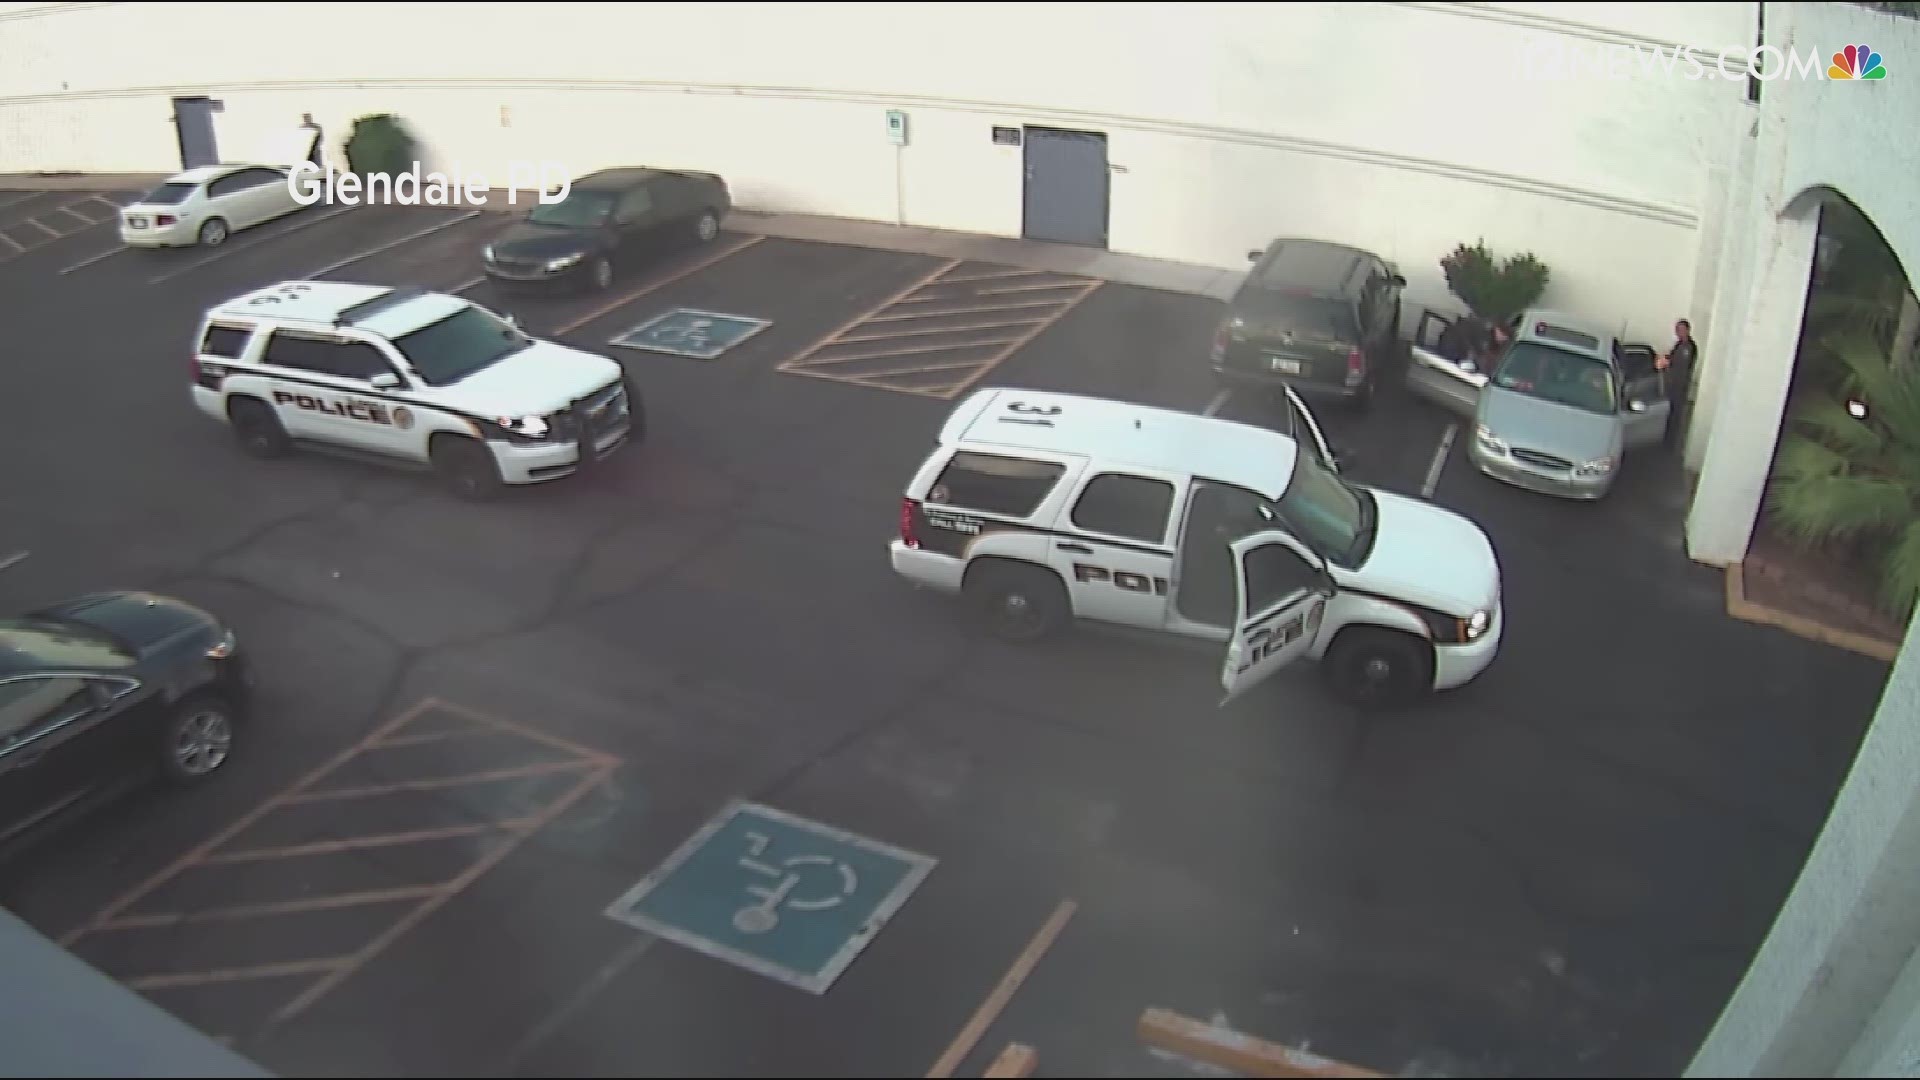 Glendale PD has released a video showing an officer being knocked unconscious during a traffic stop. An altercation occurred during the traffic stop that resulted in the suspect being tased 11 times and the officer being knocked out.